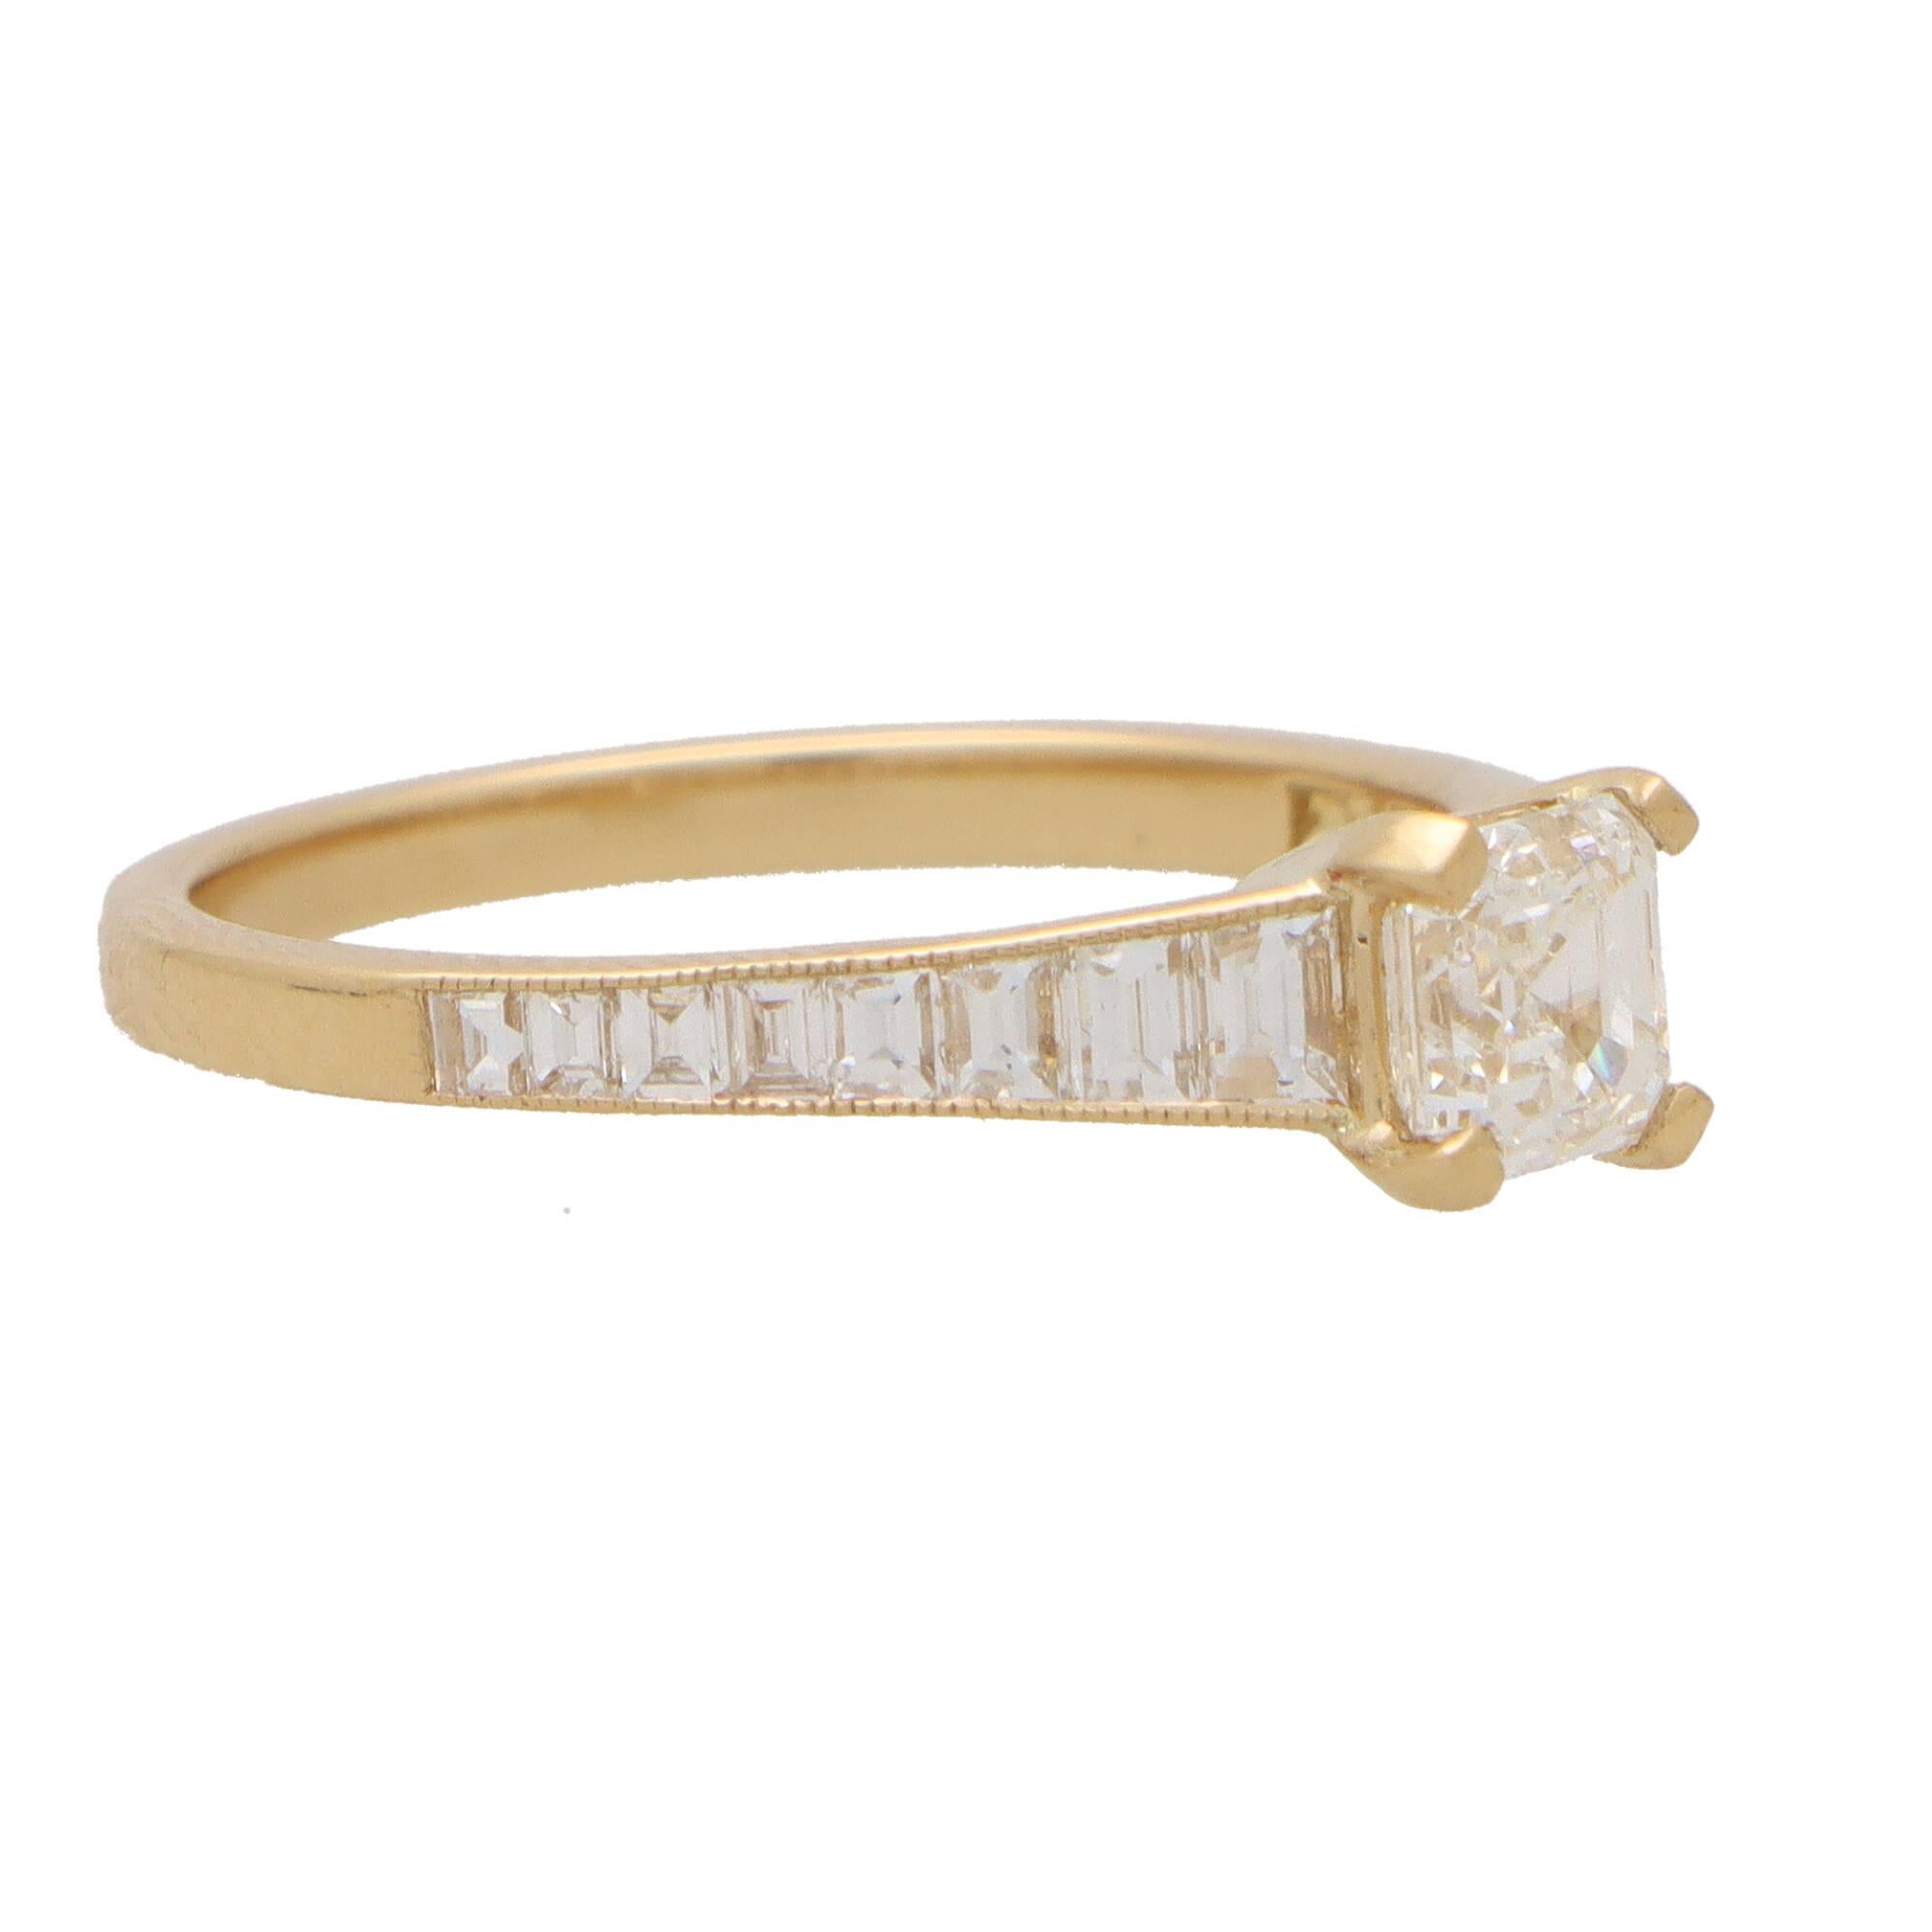  A beautiful Art Deco inspired Asscher cut diamond ring set in 18k yellow gold. 

This sparkly piece is centrally set with an extremely elegant independently GIA certified Asscher cut diamond. The diamond is securely four claw set to centre and is